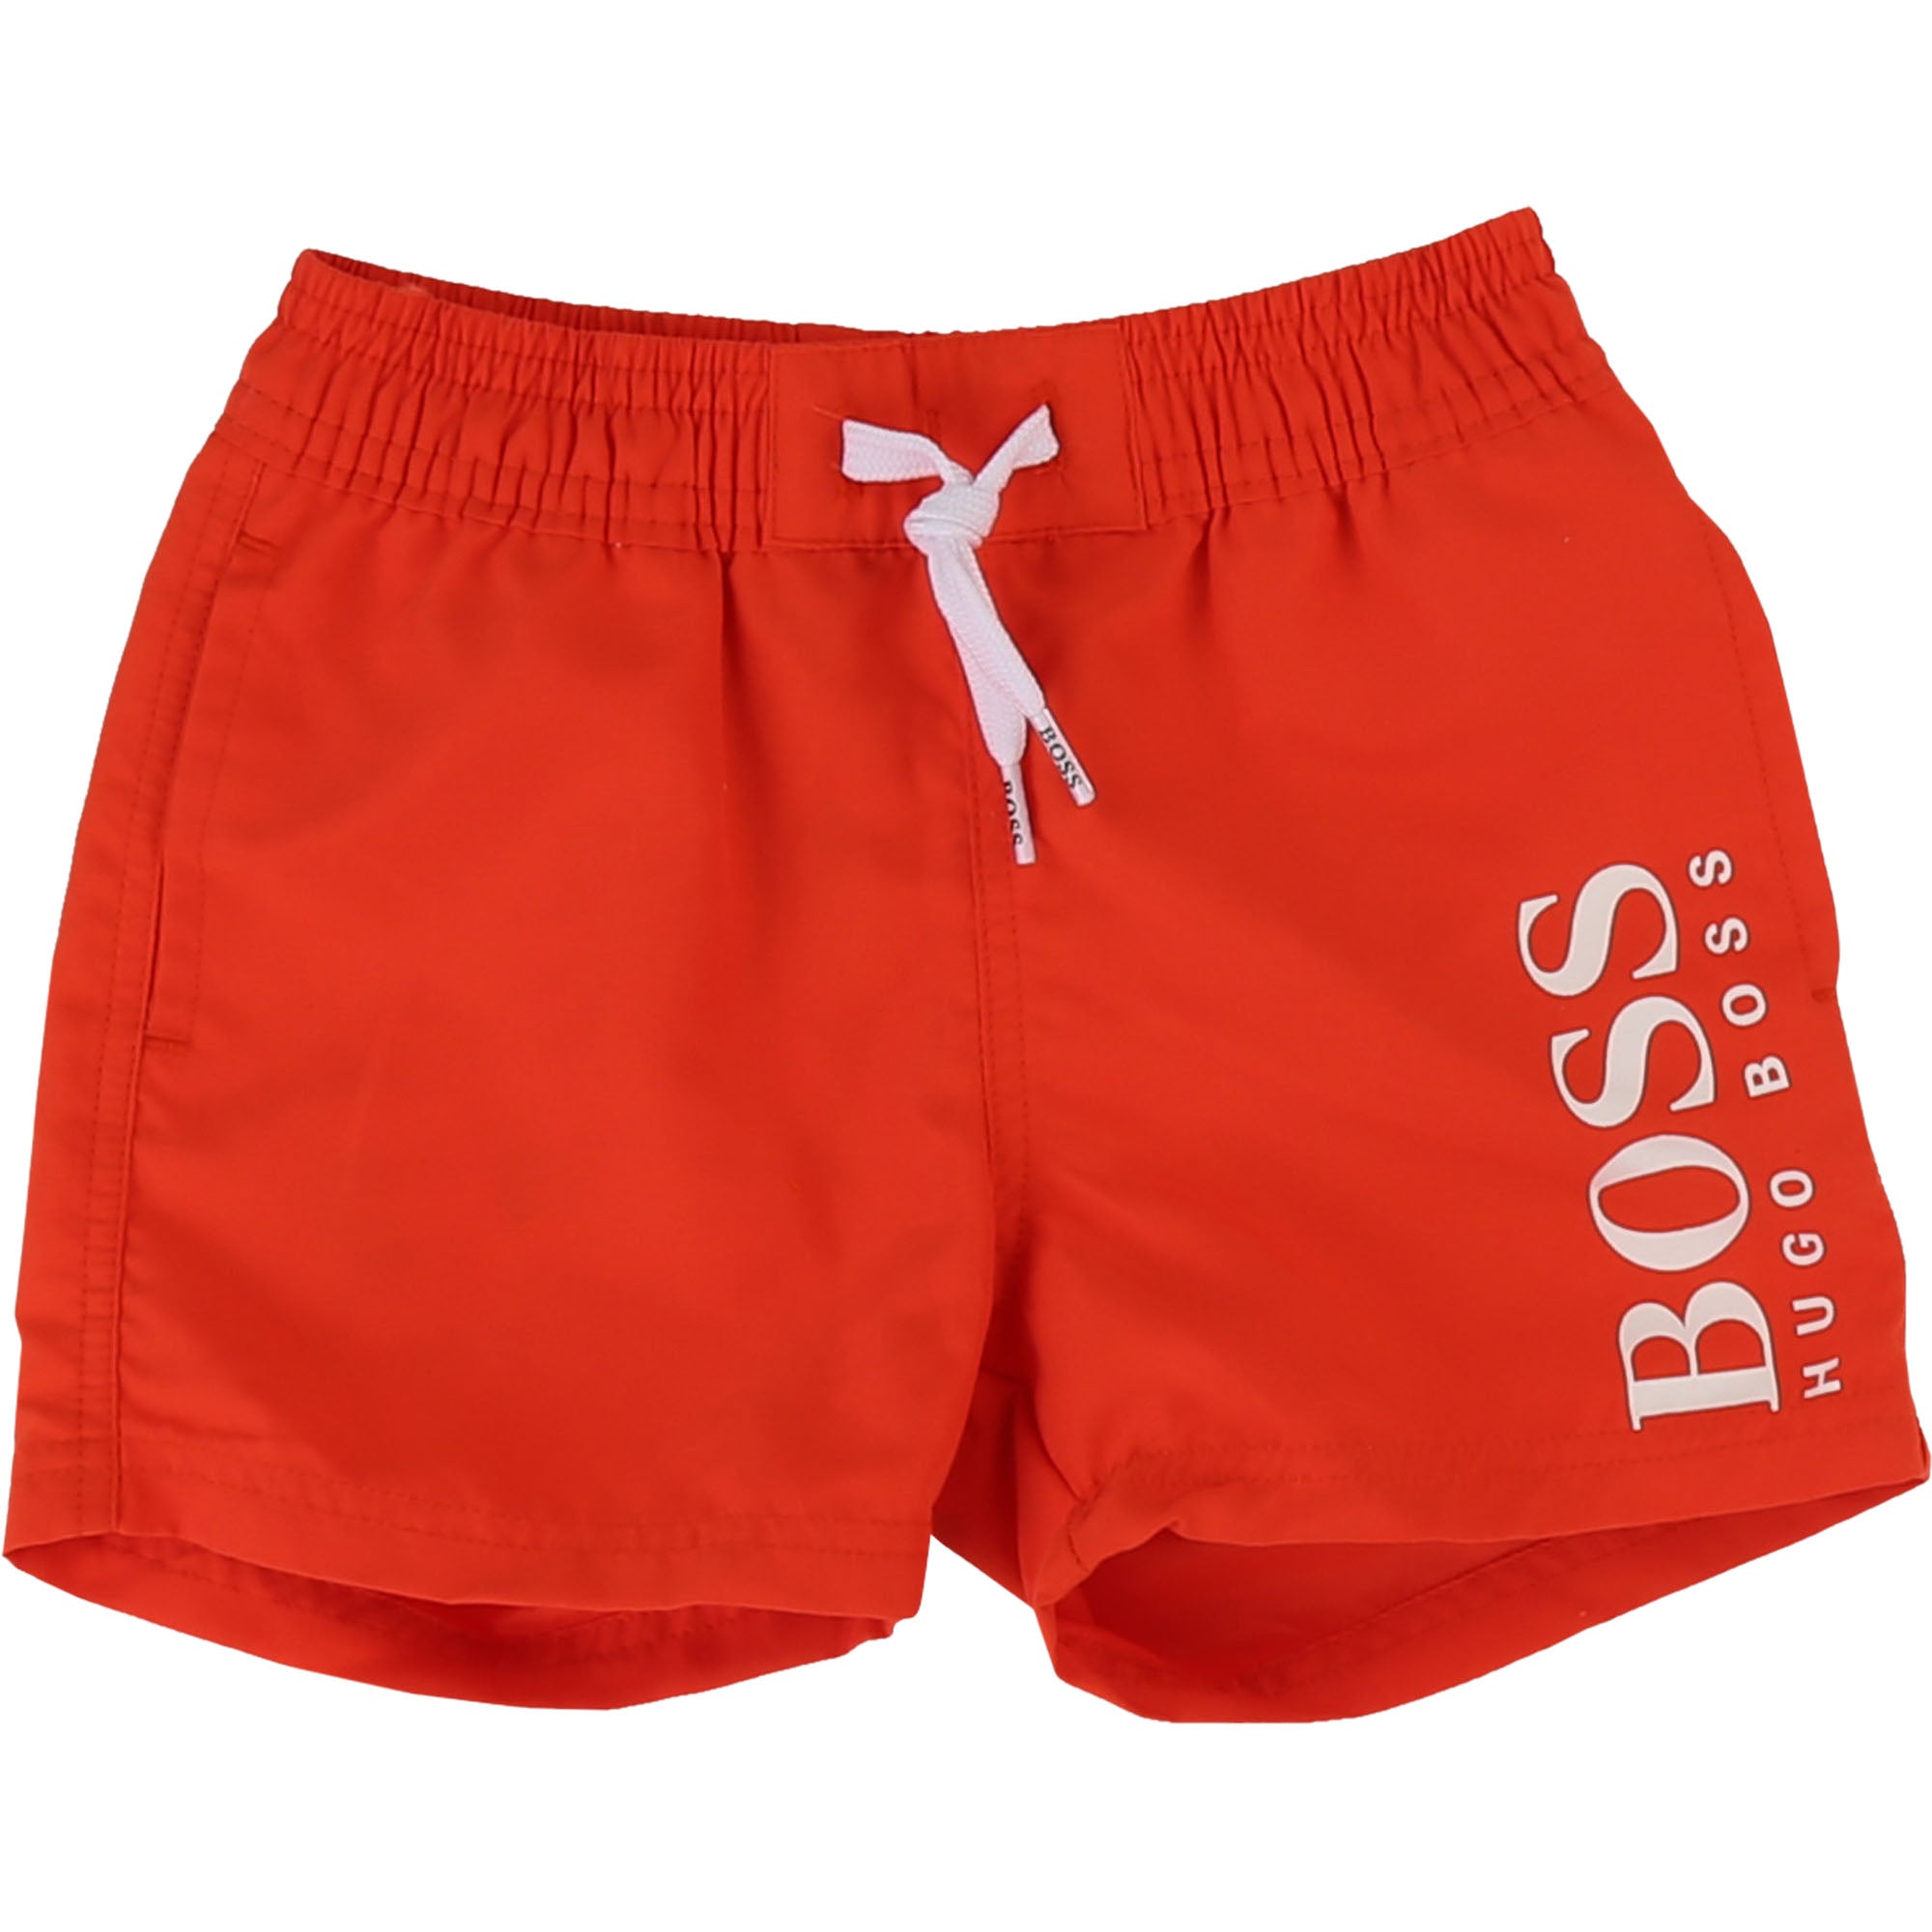 Boys Red Surfer Cotton Shorts